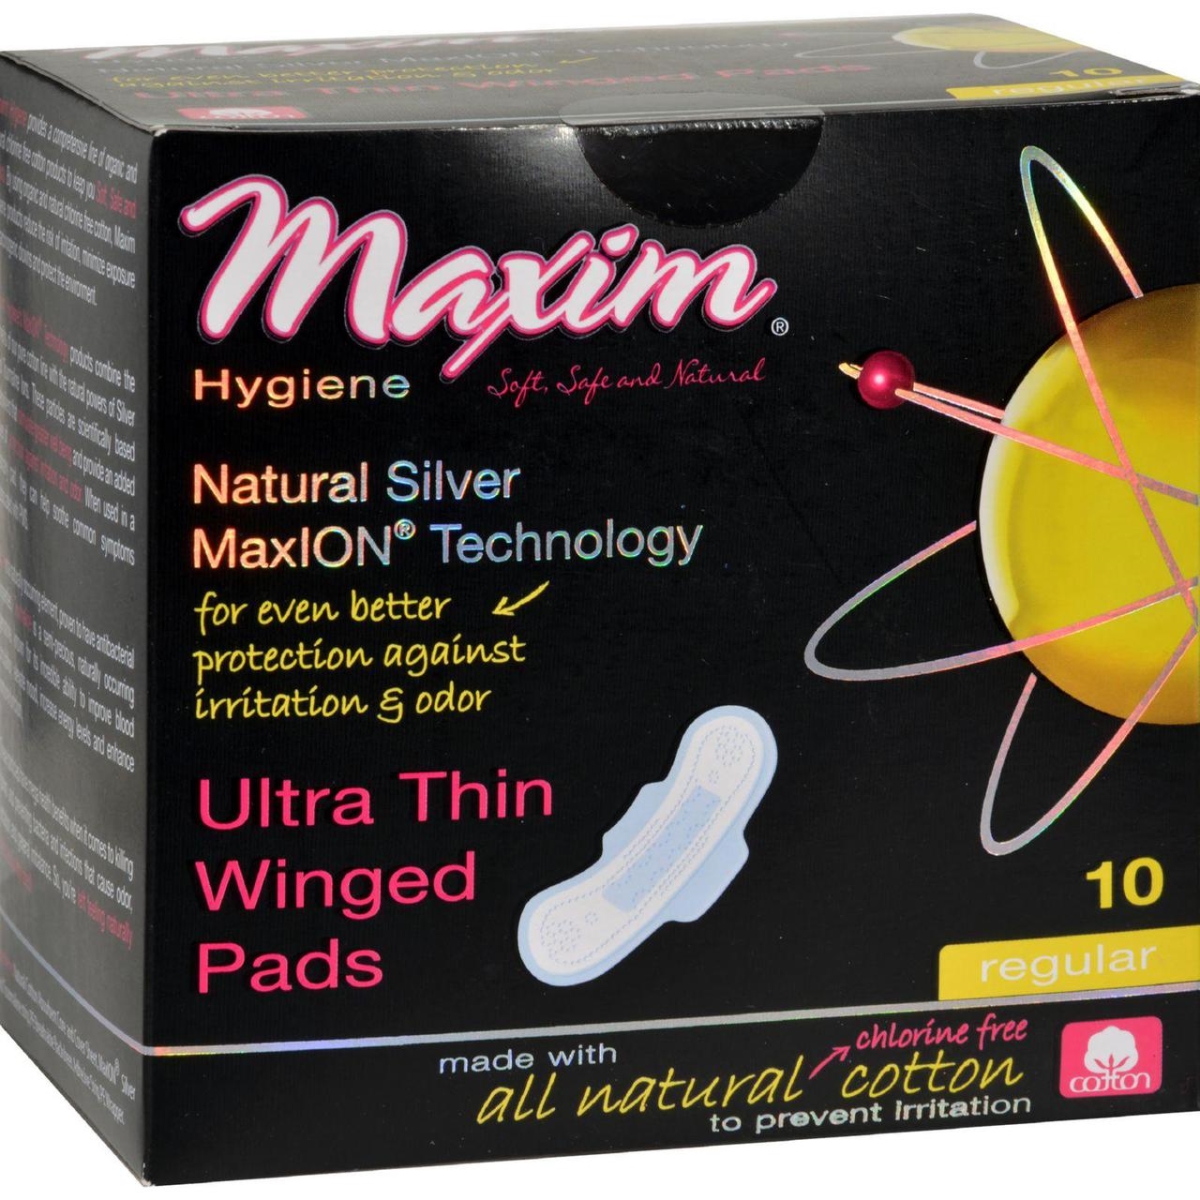 Hg1216308 Maxim Hygiene Pads With Wings, Regular - 10 Count